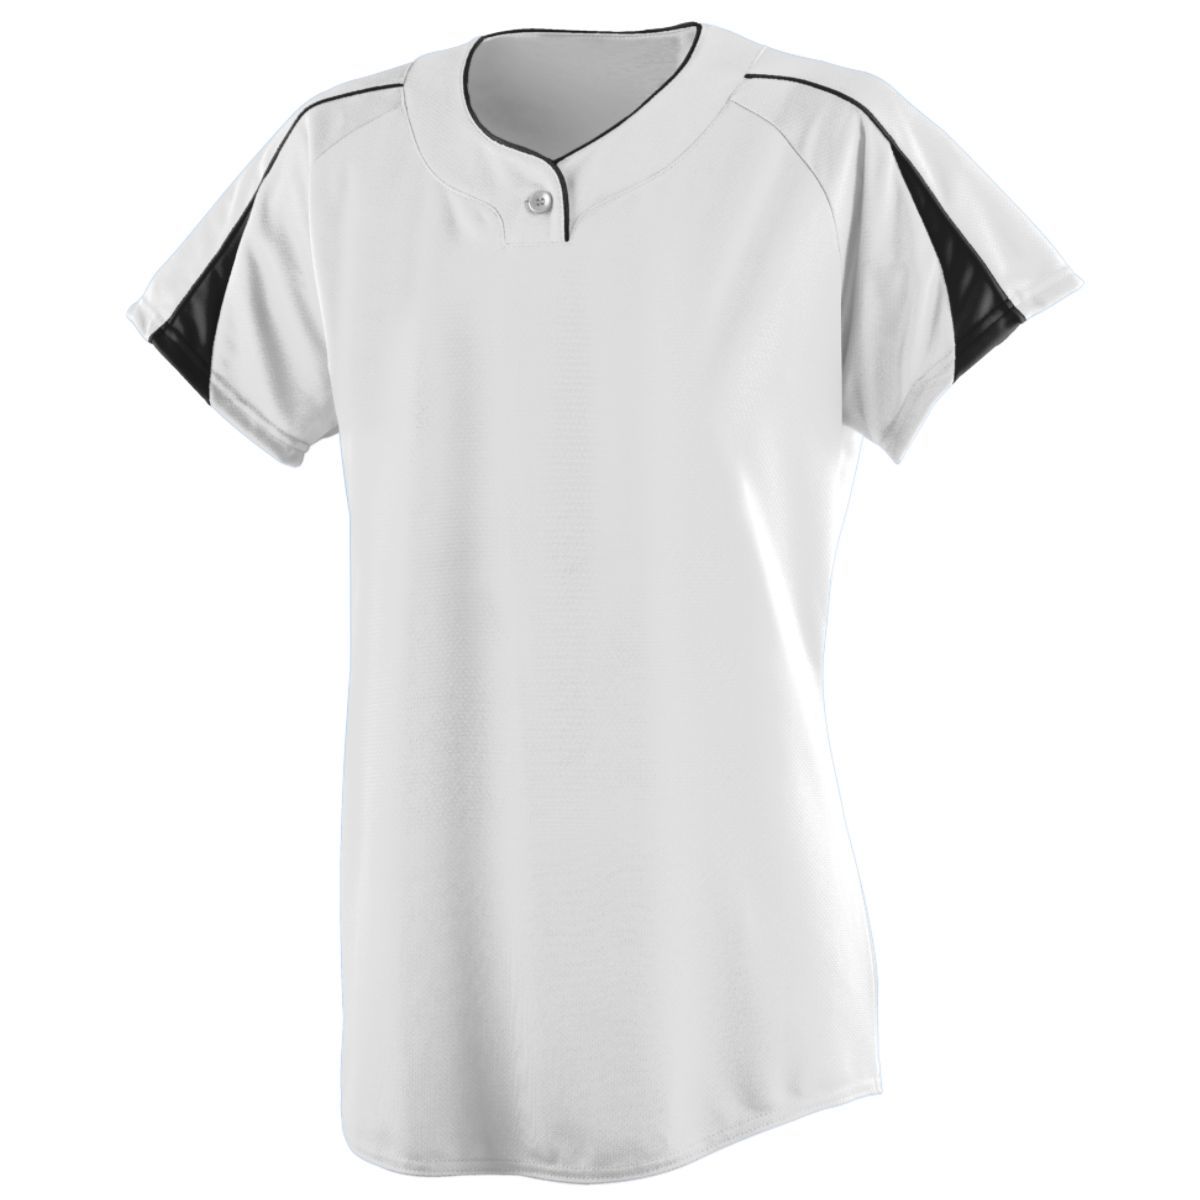 Augusta Sportswear Ladies Diamond Jersey in White/Black  -Part of the Ladies, Ladies-Jersey, Augusta-Products, Softball, Shirts product lines at KanaleyCreations.com